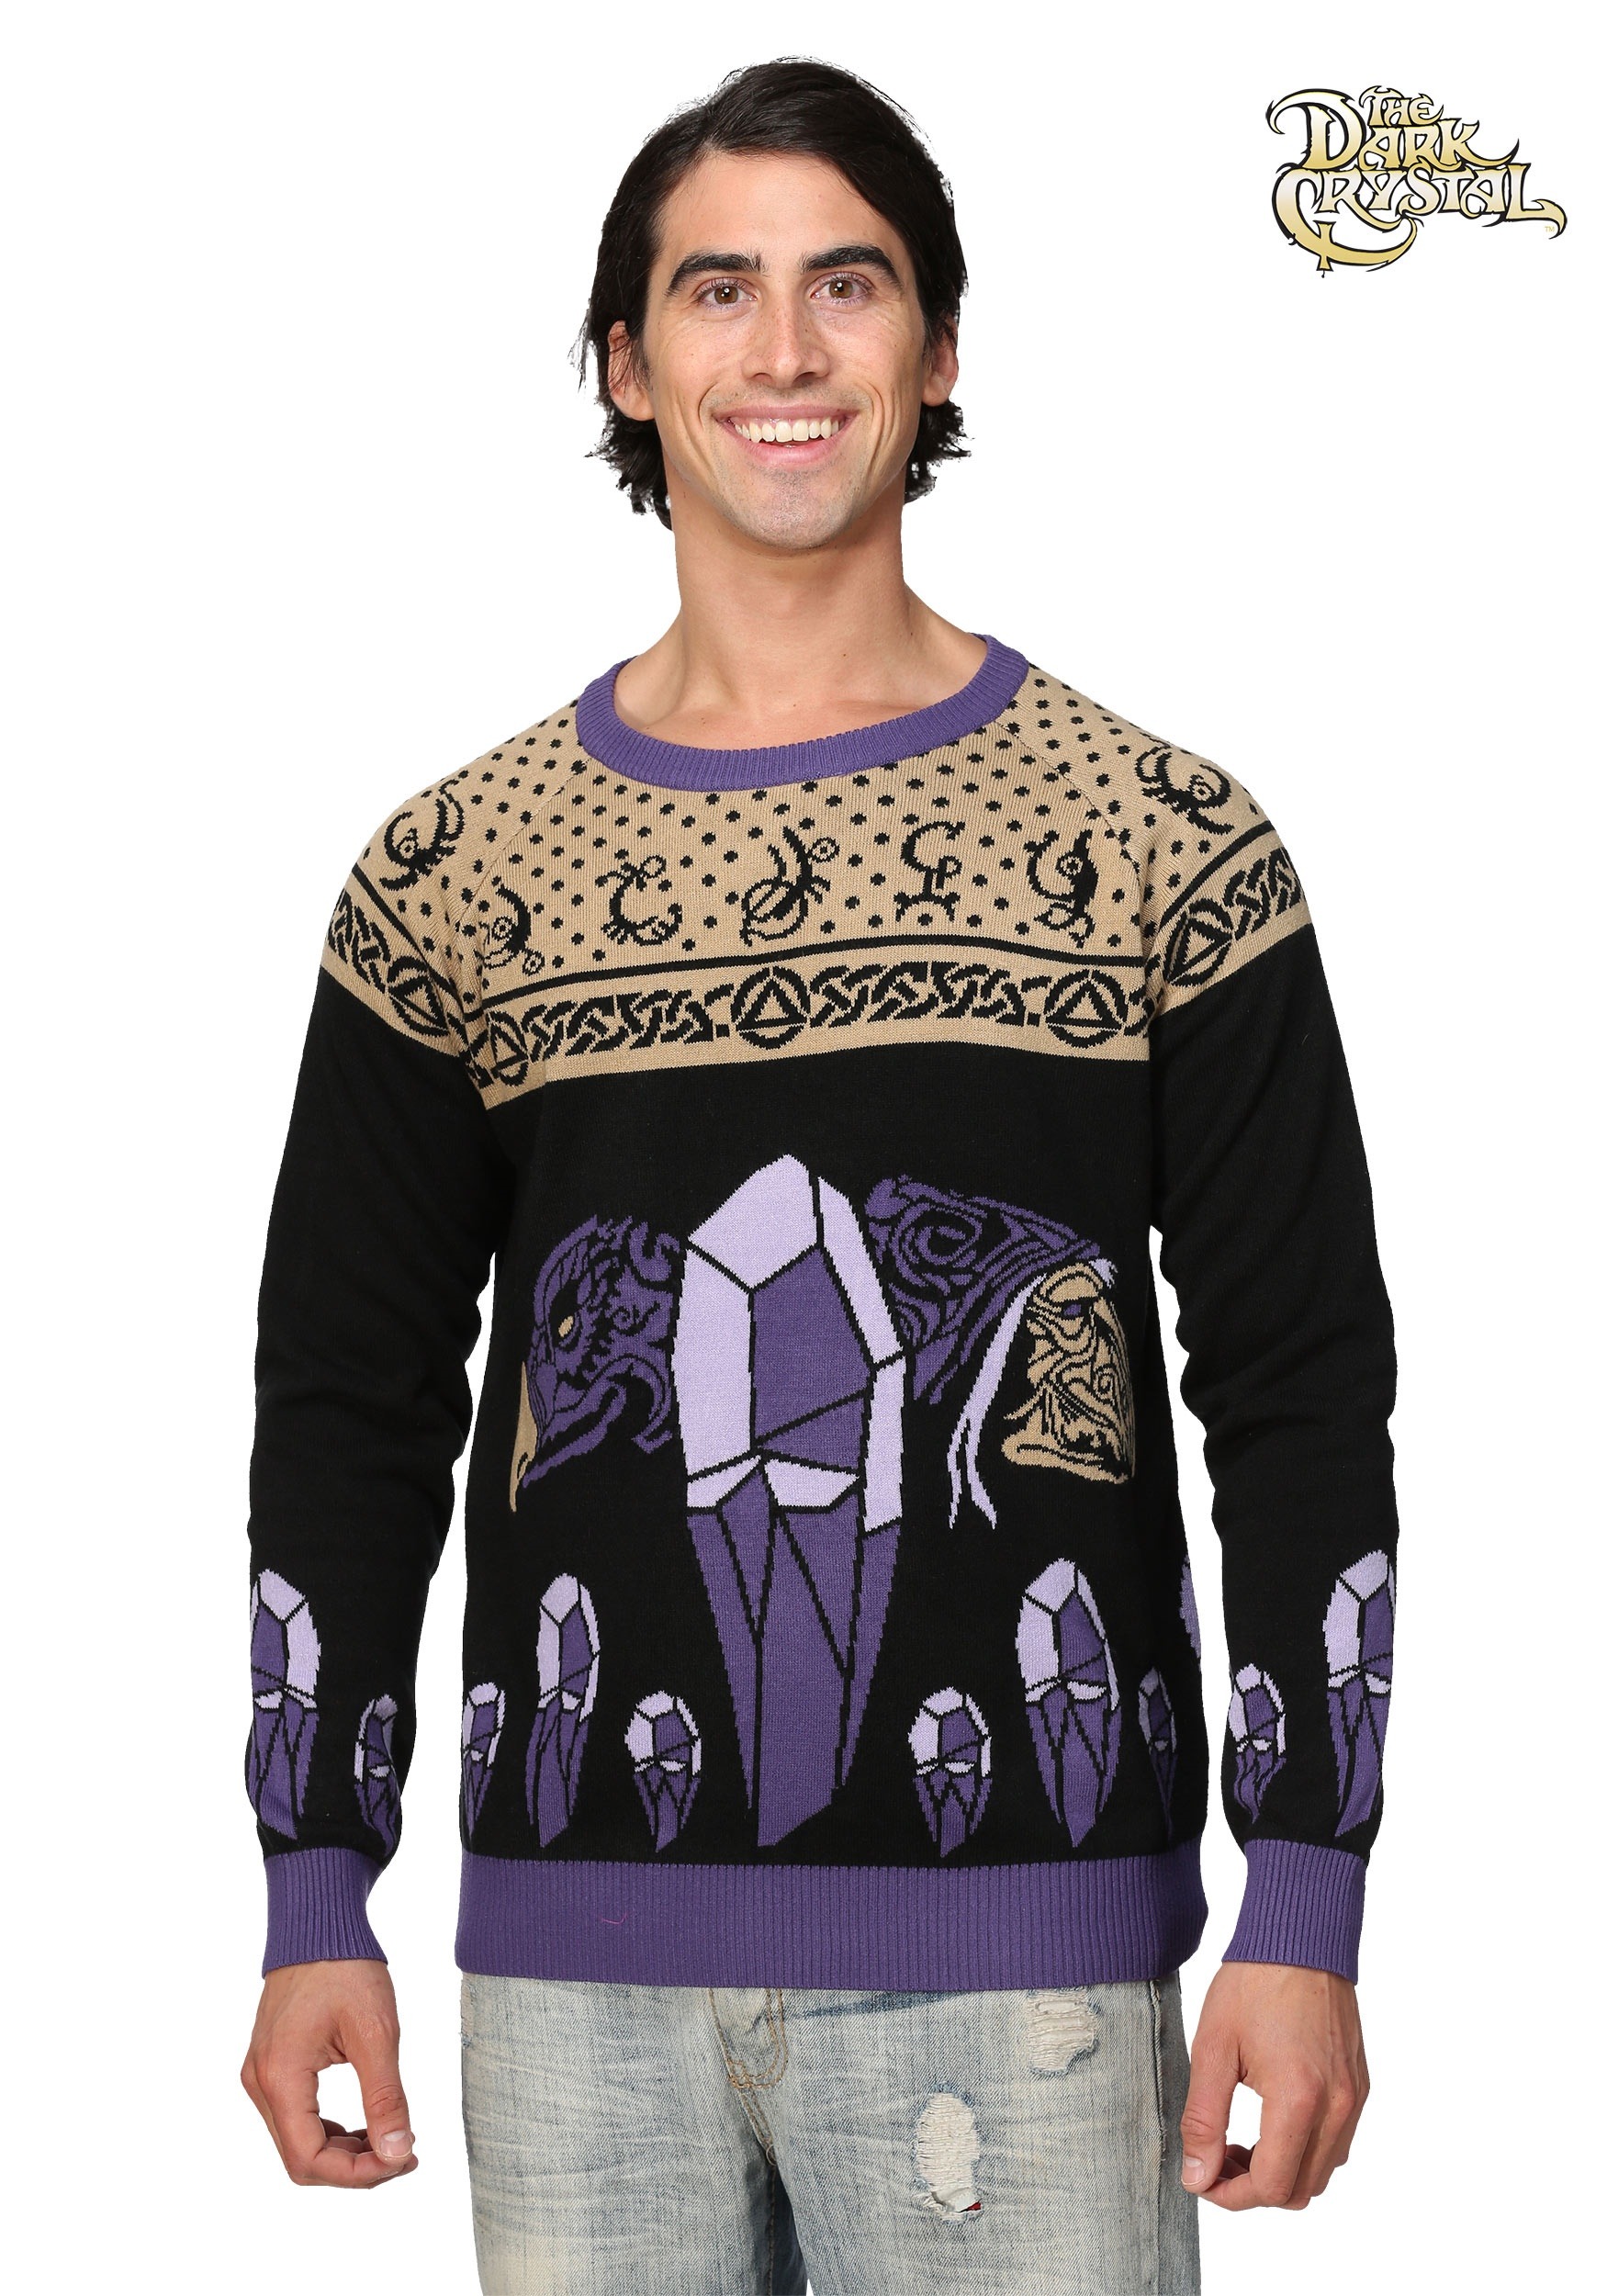 The Dark Crystal Ugly Christmas Sweater